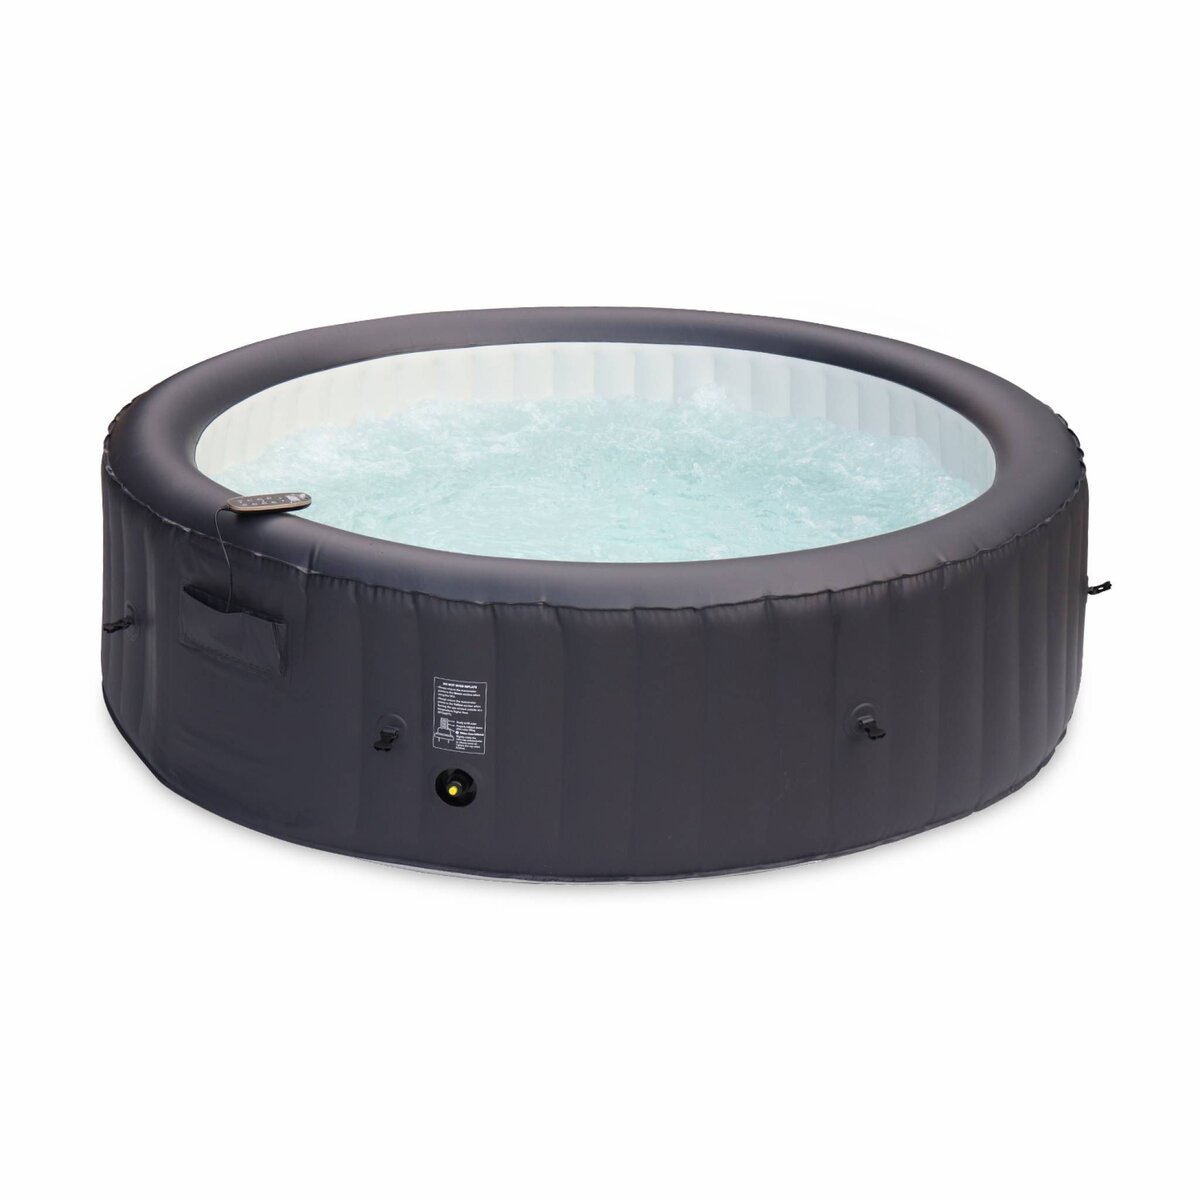 MSpa SPA RIMBA 8 gonflable rond - Bleu nuit - spa gonflable 8